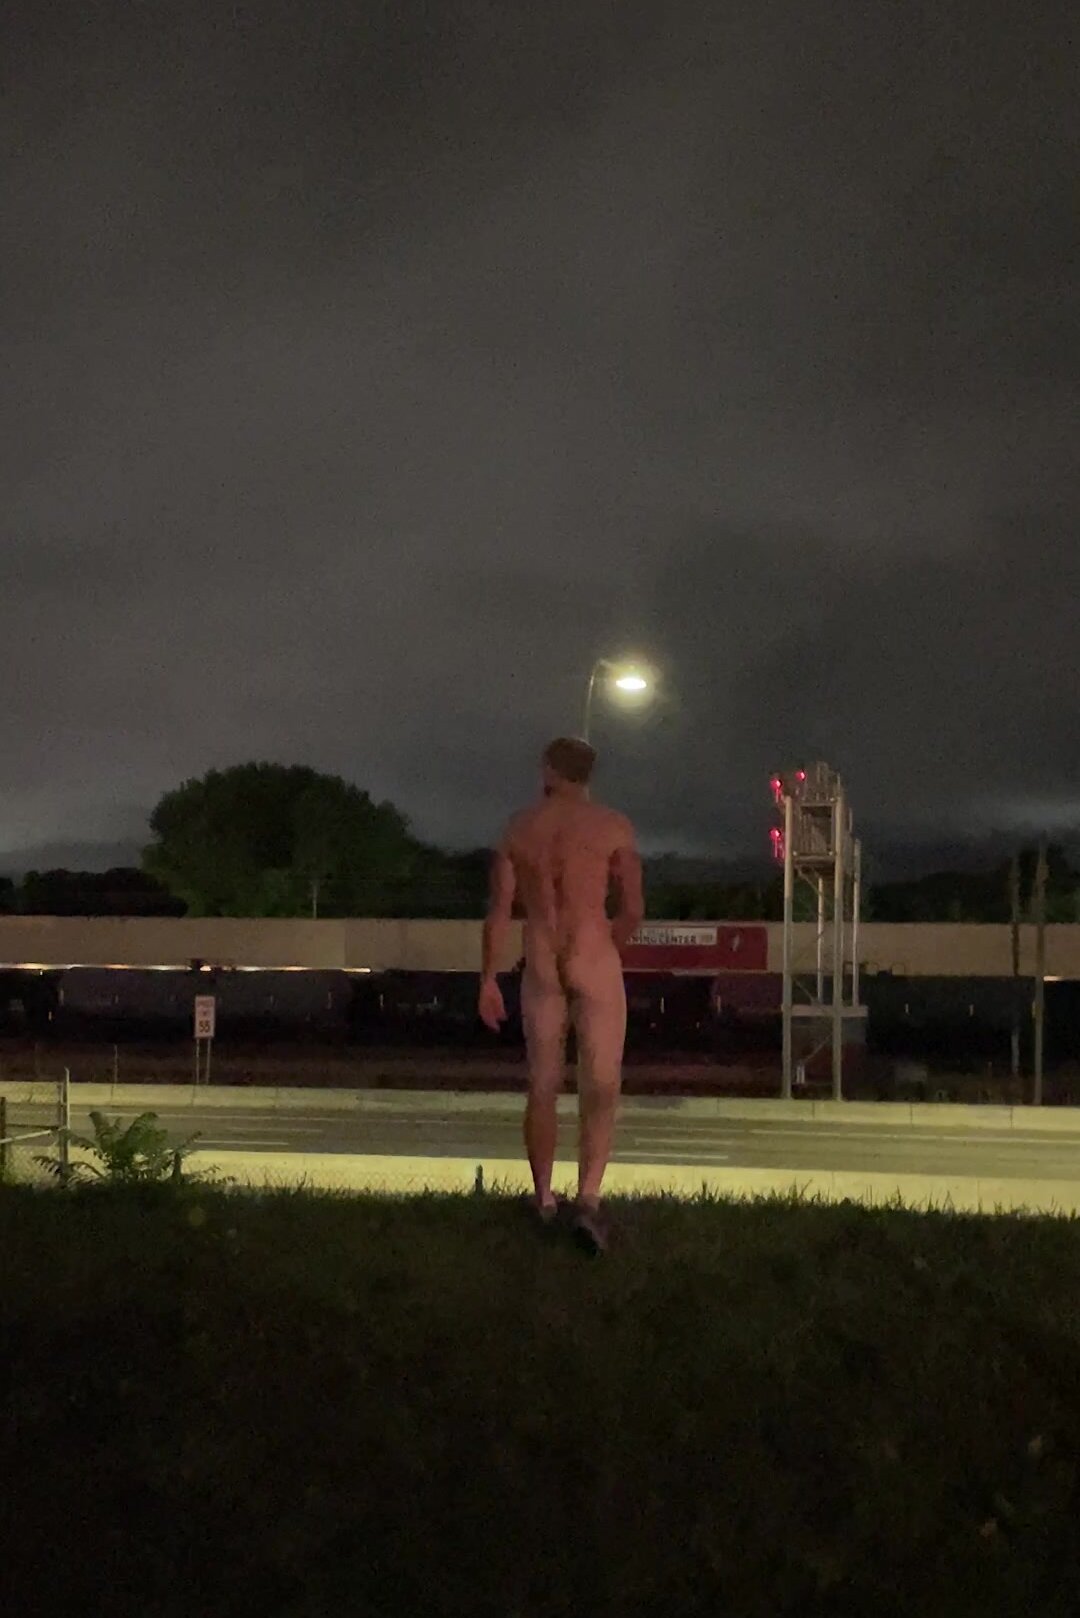 NUDIST EXHIBITIONIST LOST BET AND EXPOSED IN PUBLIC 2